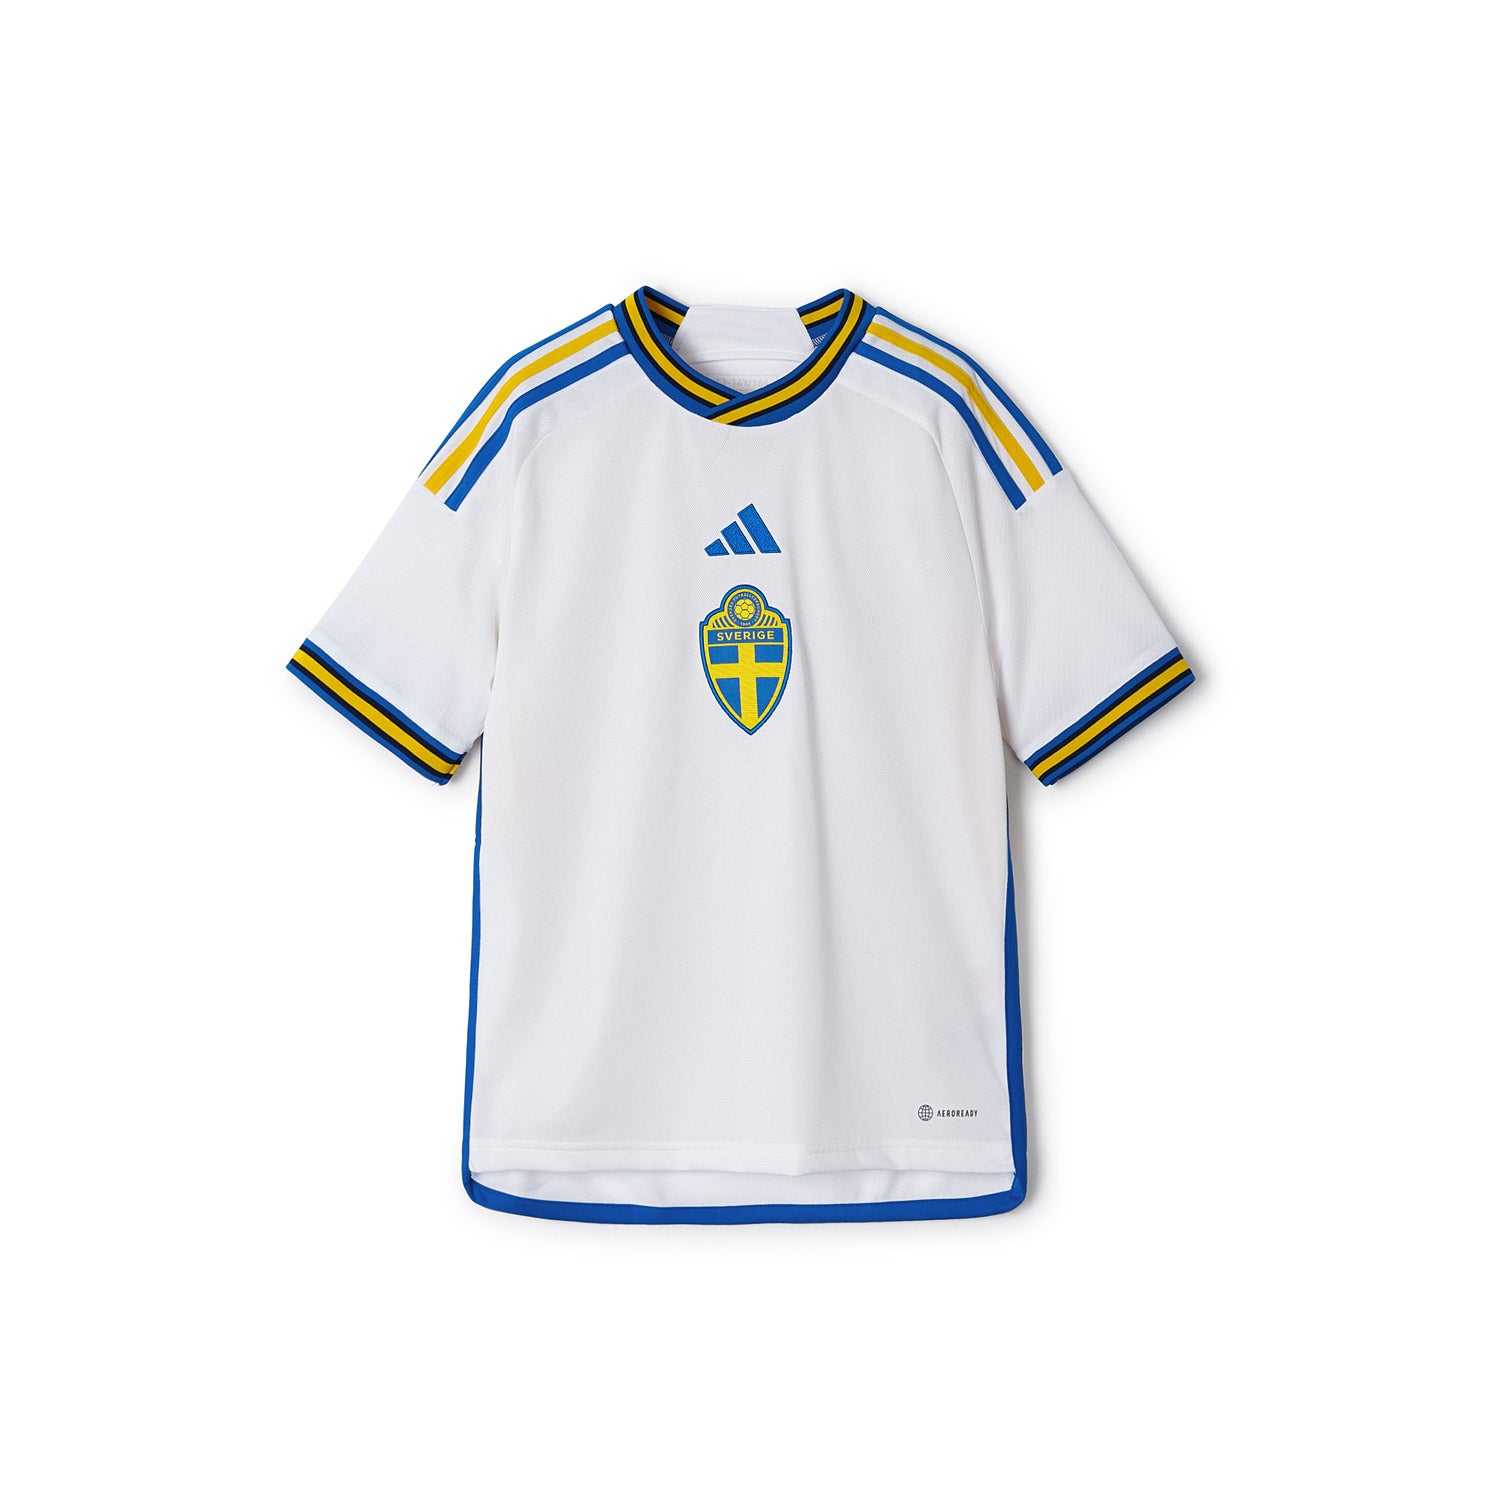 Sweden 22 Away Jersey - Youth